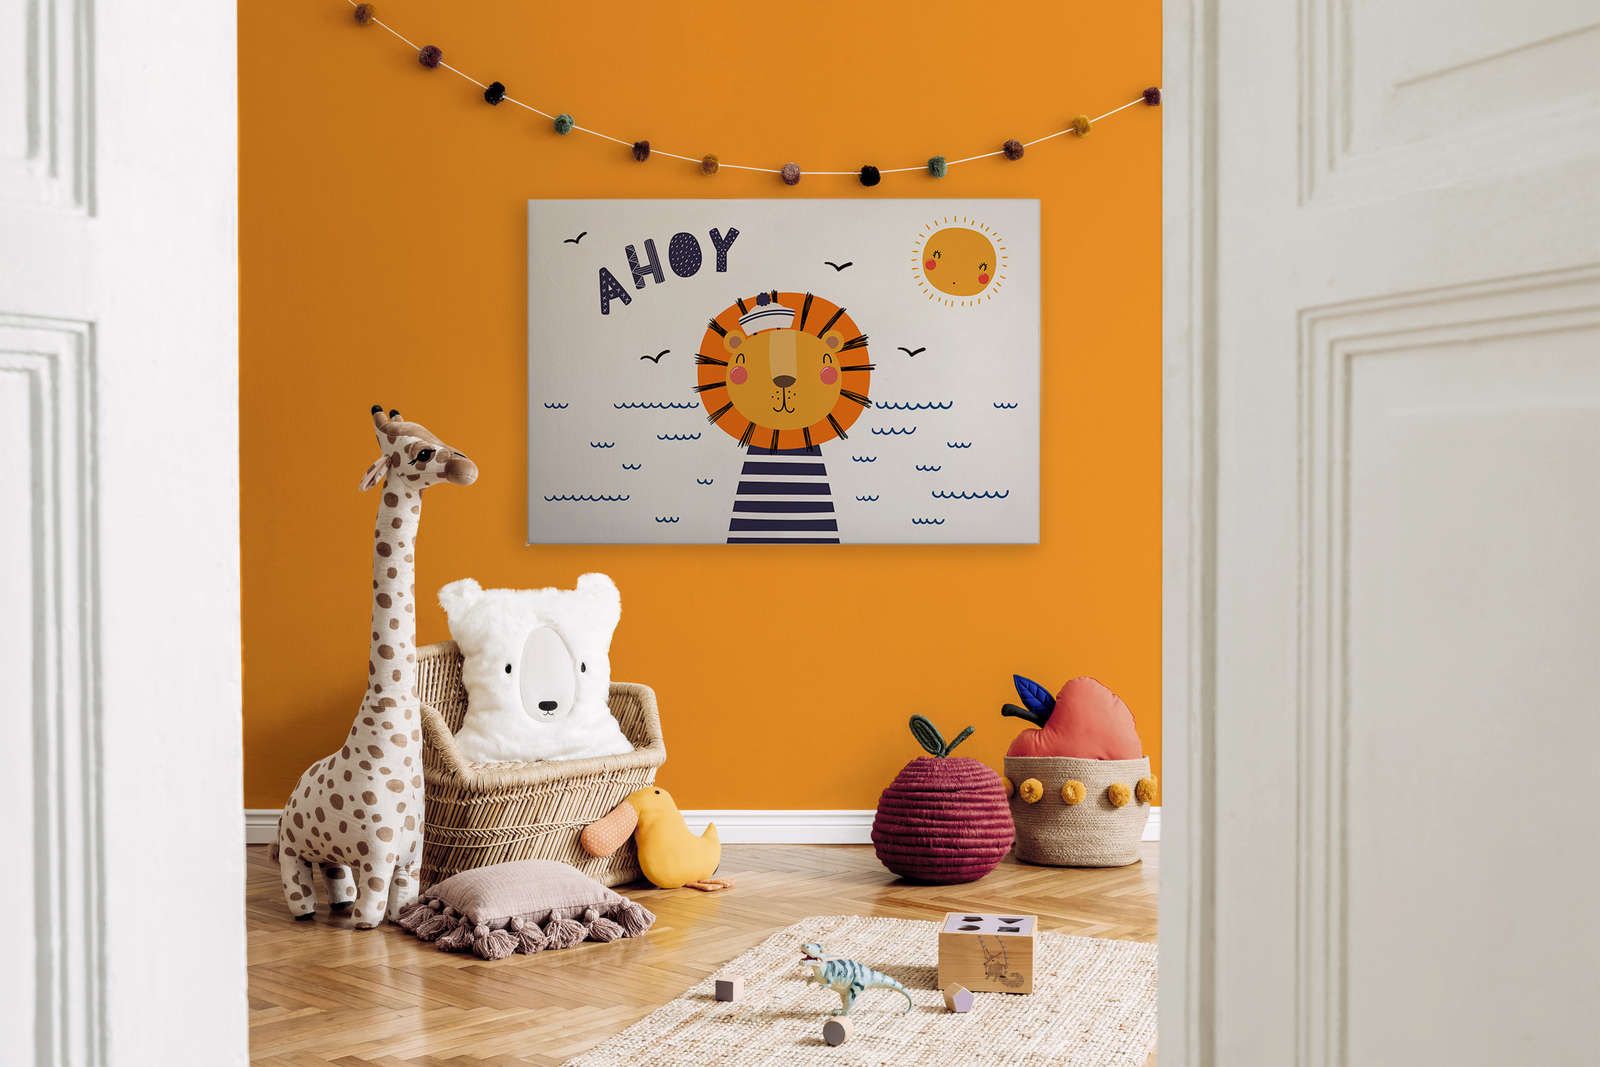             Canvas for children's room with lion pirate - 120 cm x 80 cm
        